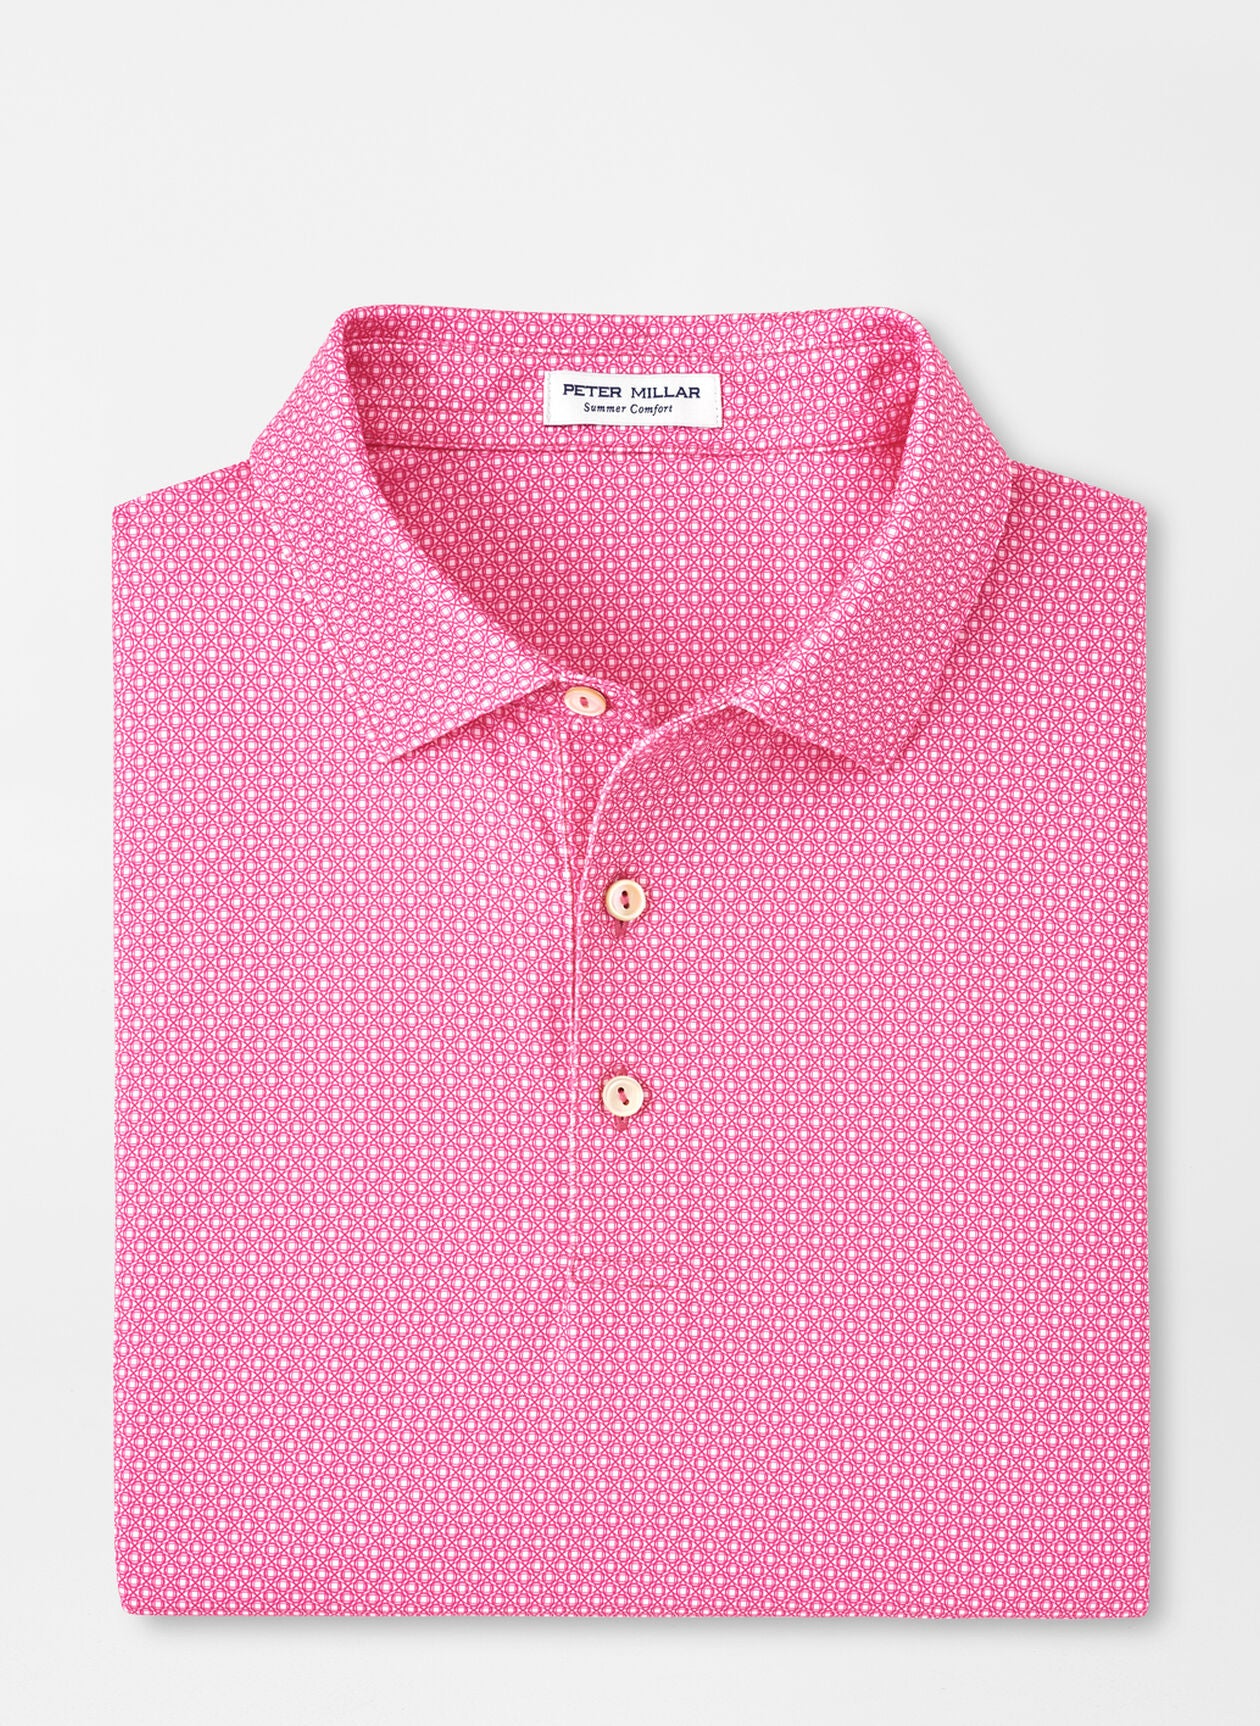 Tesseract Performance Jersey Polo - Pink Ruby